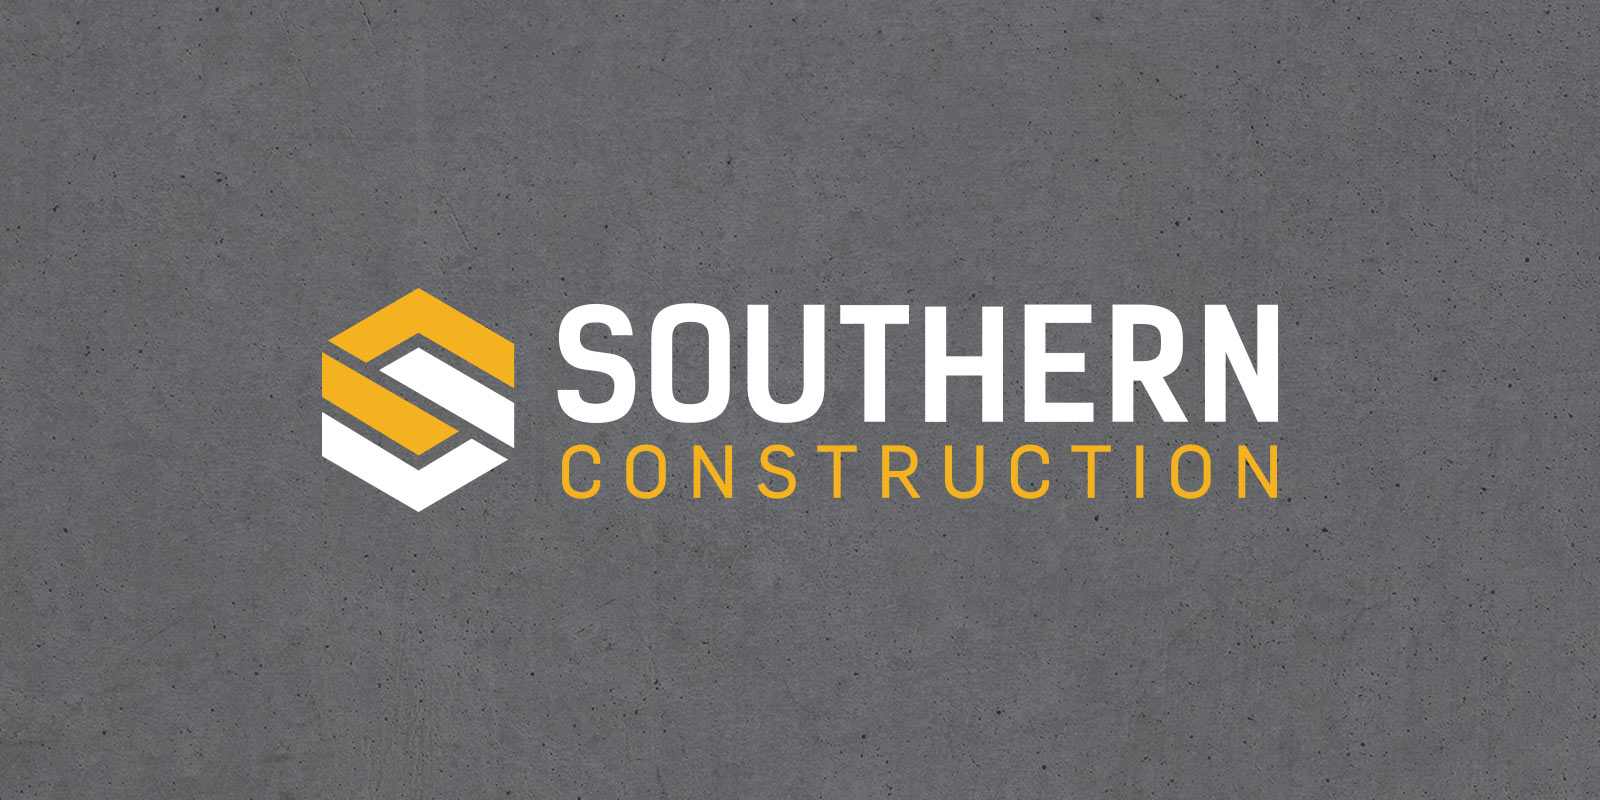 Southern Construction